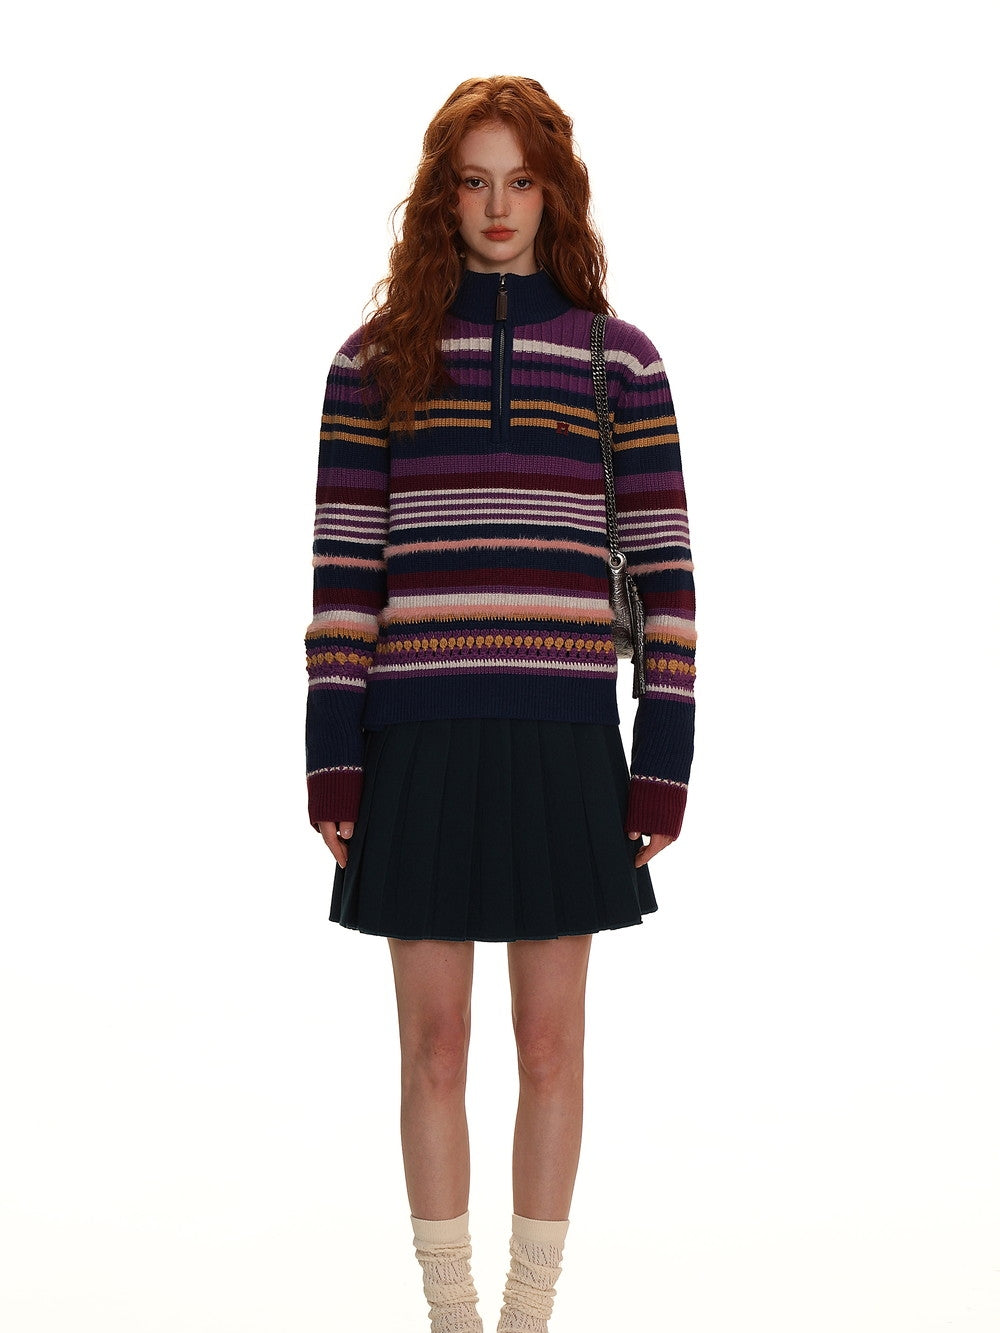 Retro Colorful Knit With High-Neck Border - chiclara